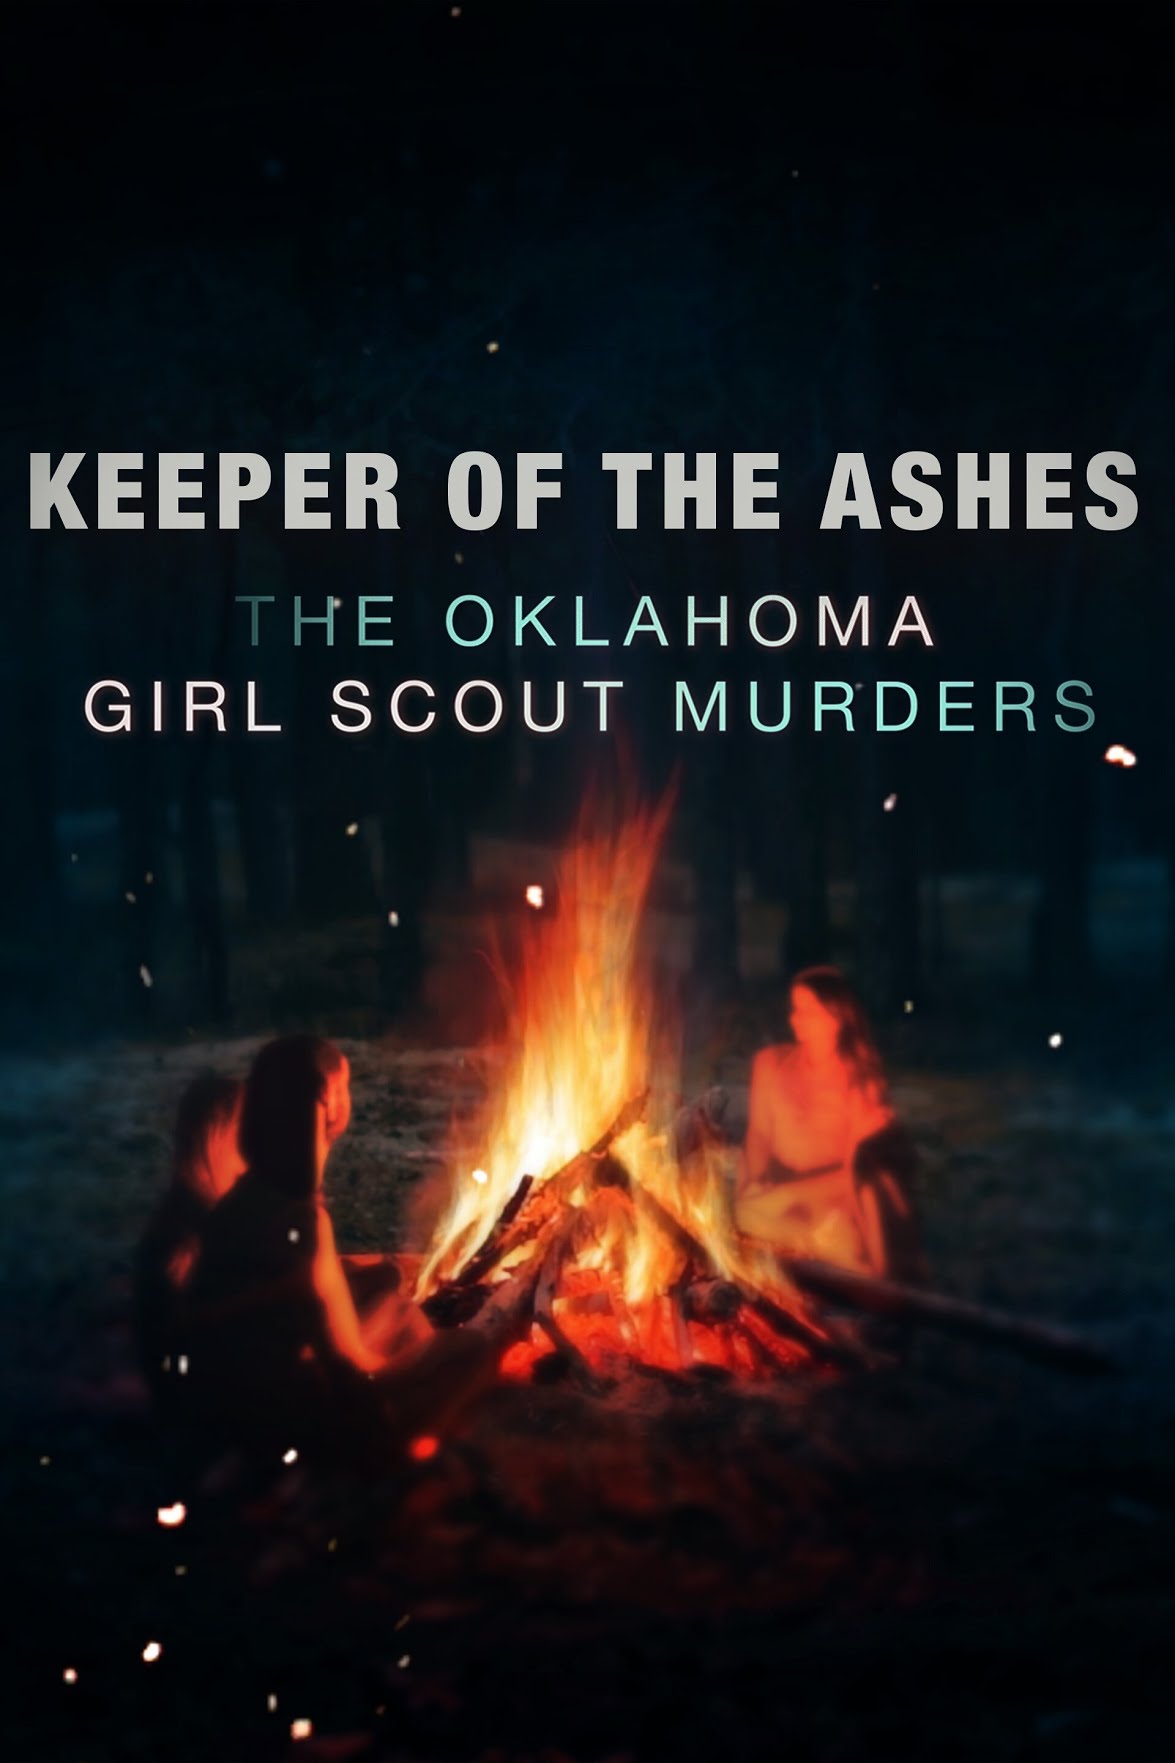 EN - Keeper of the Ashes The Oklahoma Girl Scout Murders